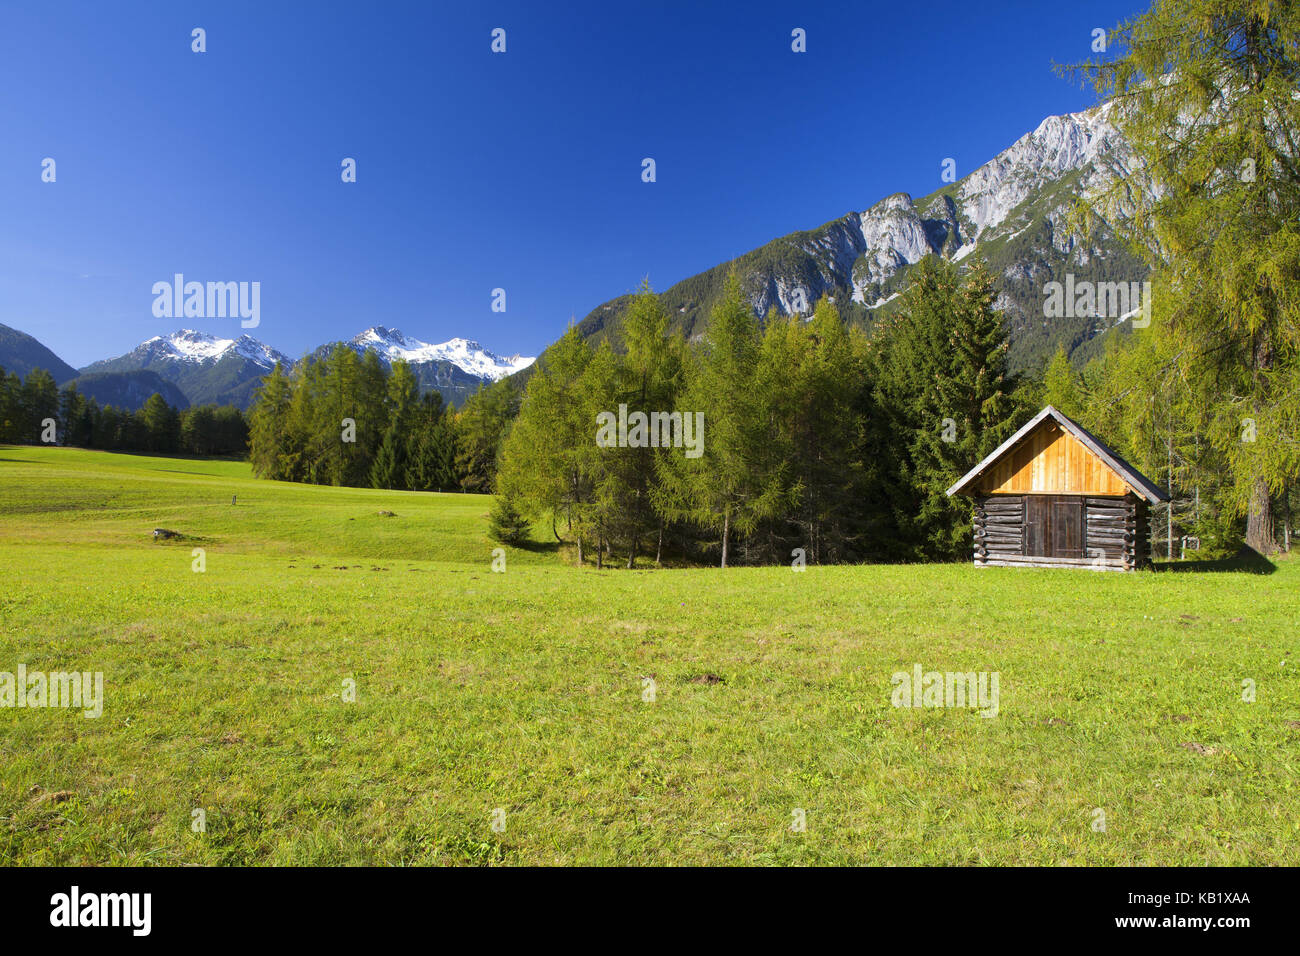 Austria, Tyrol, Mieminger plateau, larch meadows in Obsteig, Stock Photo